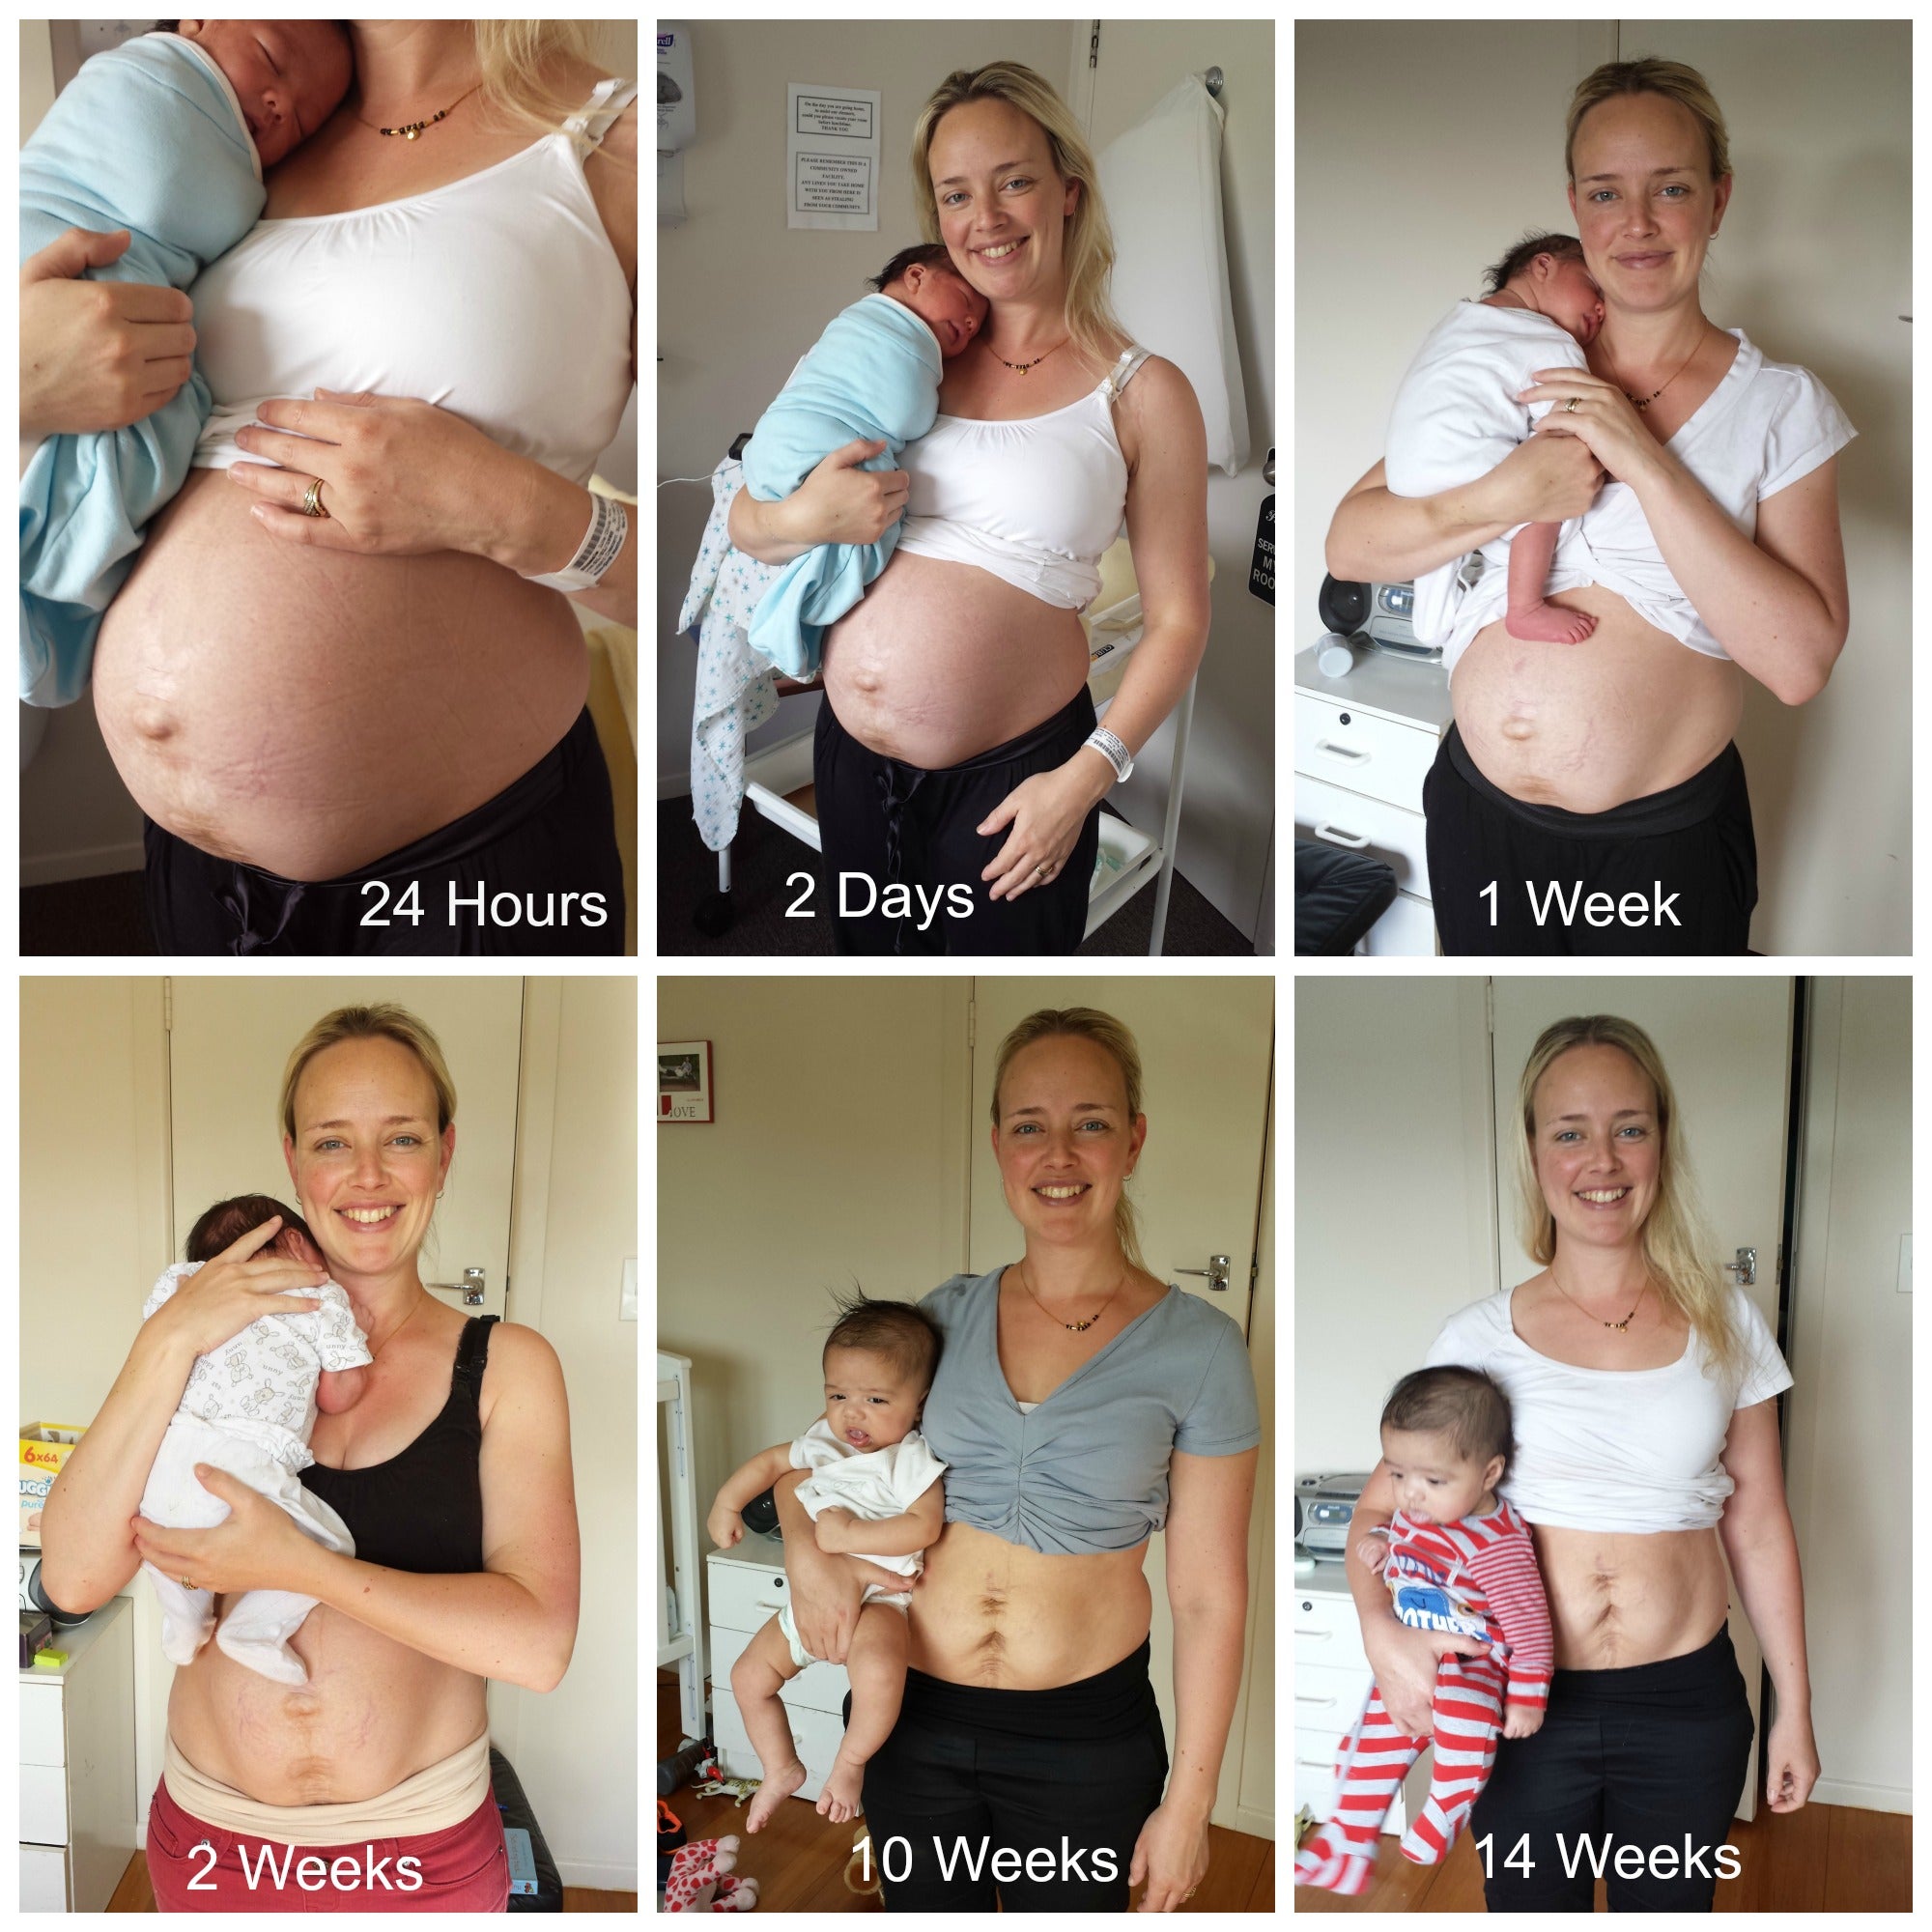 Your body after baby: The first 6 weeks